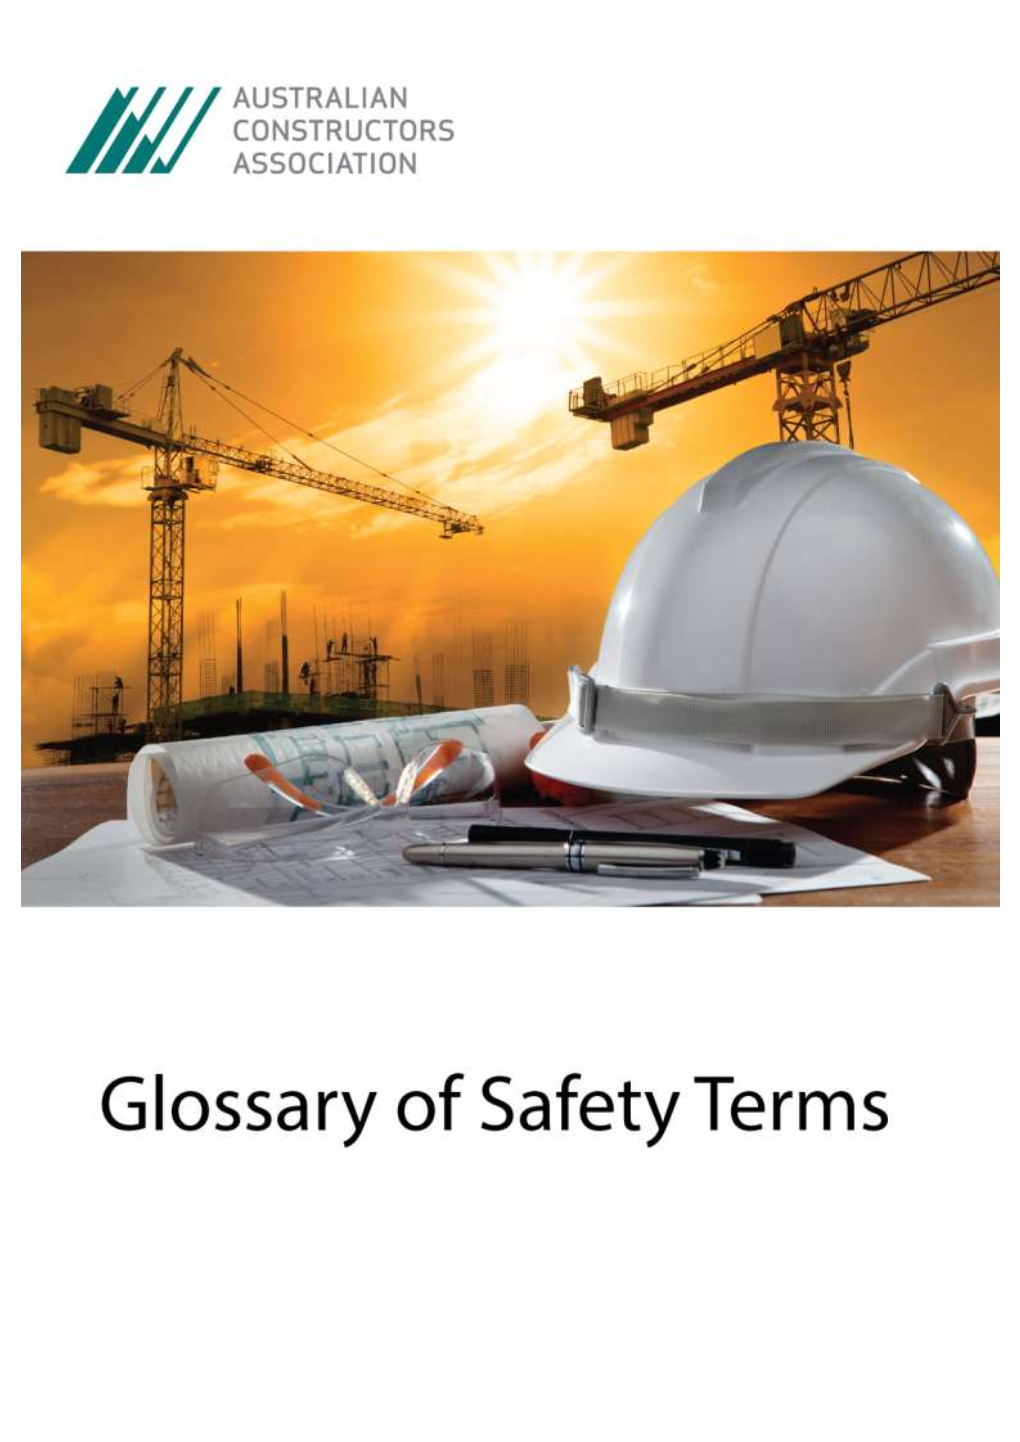 Glossary of Safety Terms Introduction